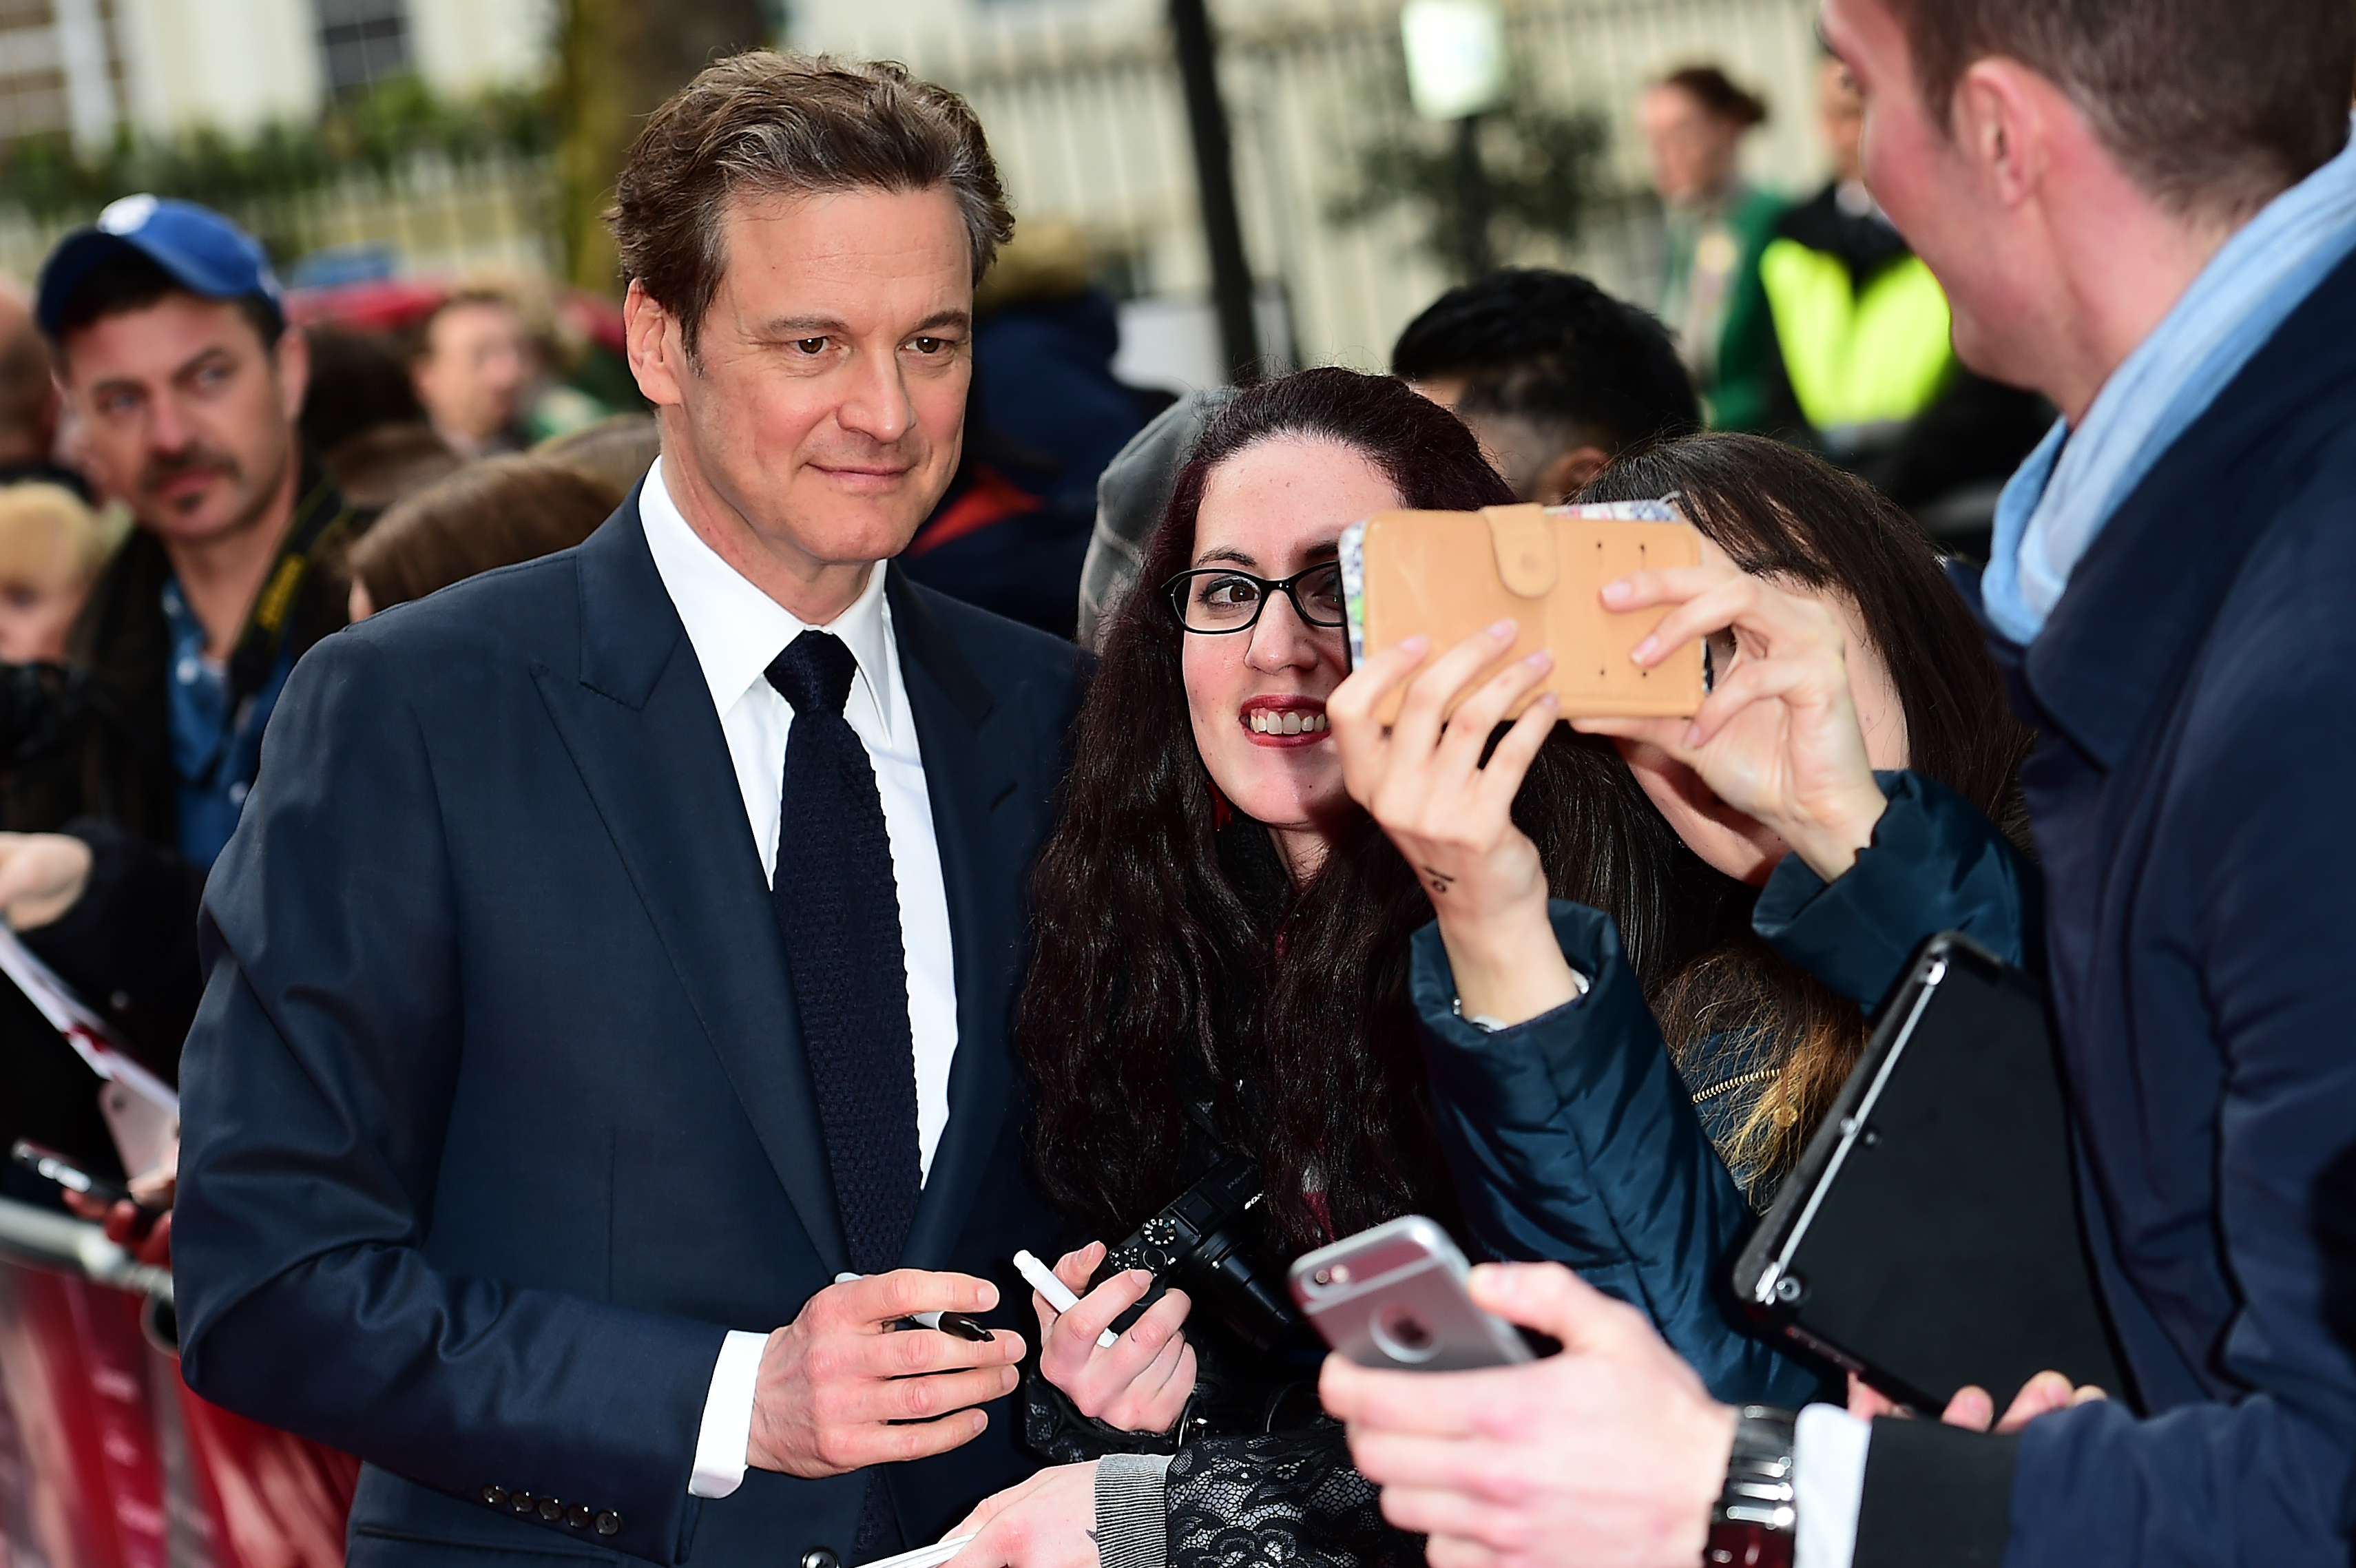 Colin Firth becomes Italian citizen after Brexit vote